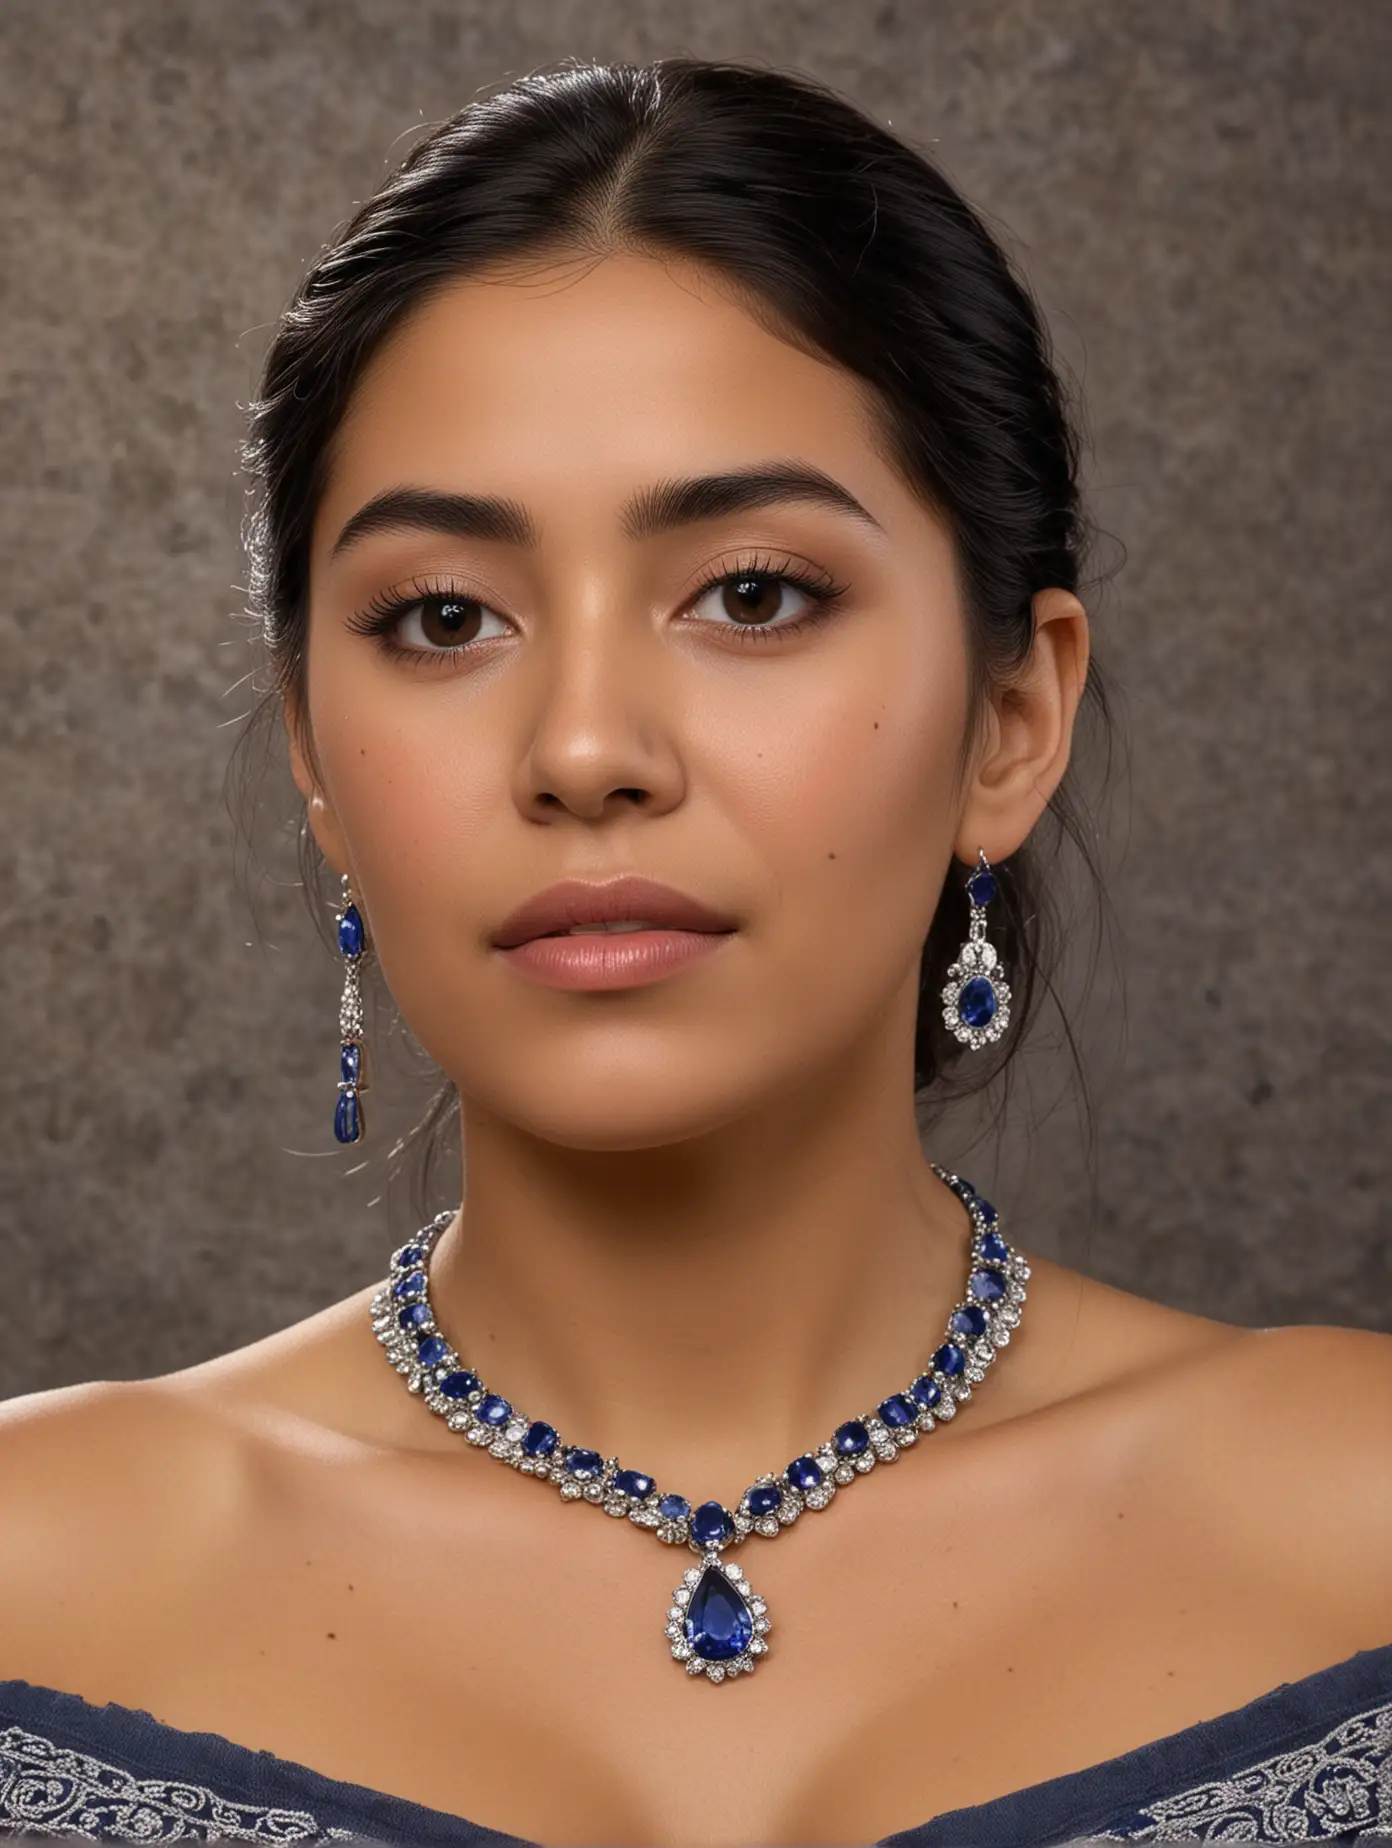 A Mexican woman with Sapphire necklace
